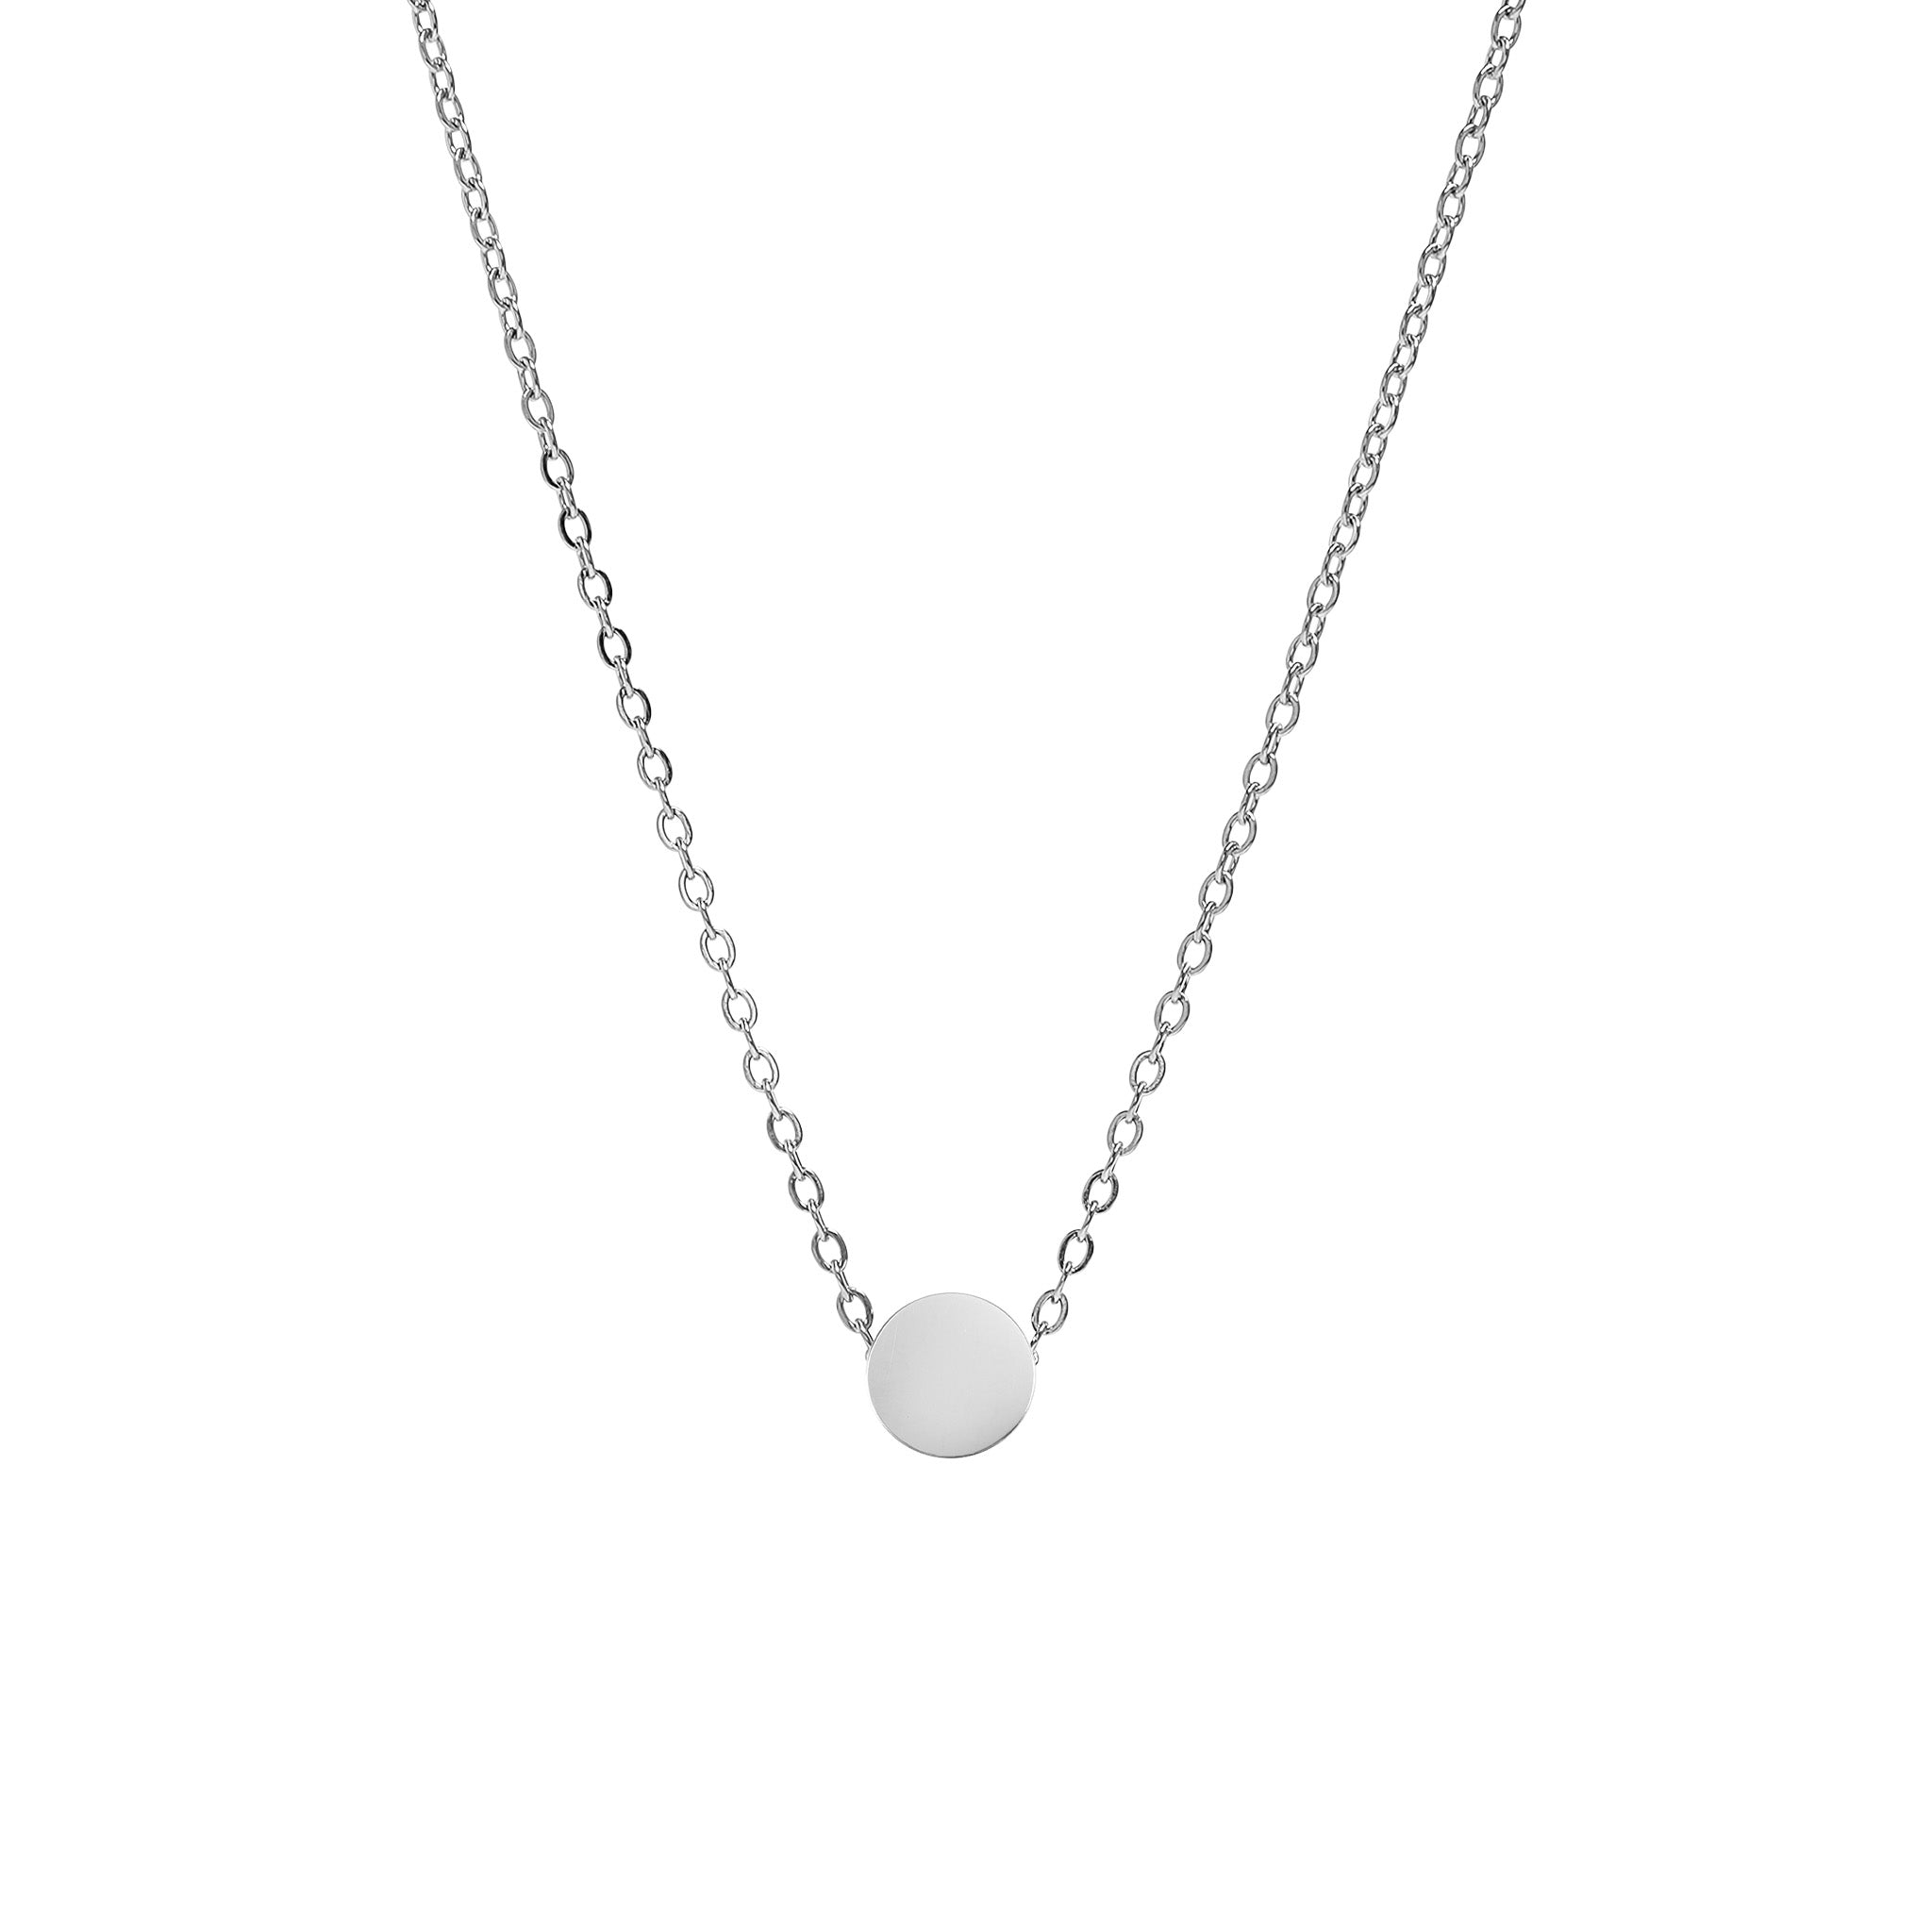 Stainless Steel Mini Circle Necklace / SBB0344